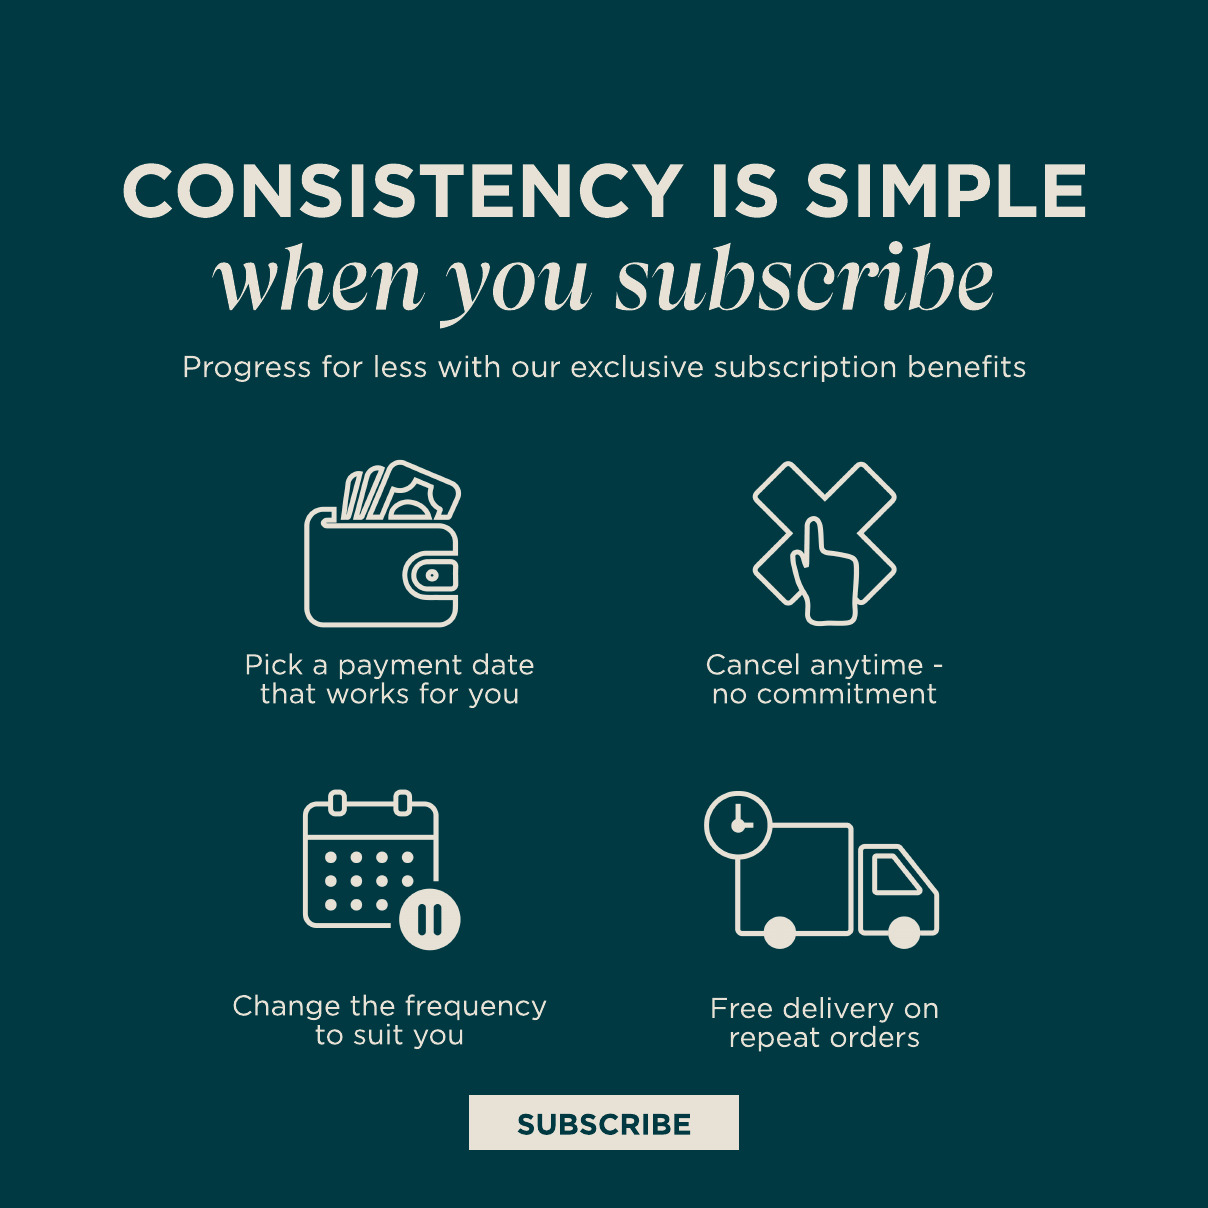 Consistency is simple when you subscribe. Progress for less with our exclusive subscription benefits. Pick a payment date that works for you. Change the frequency. Cancel Anytime. Free delivery on repeat orders. Subscribe